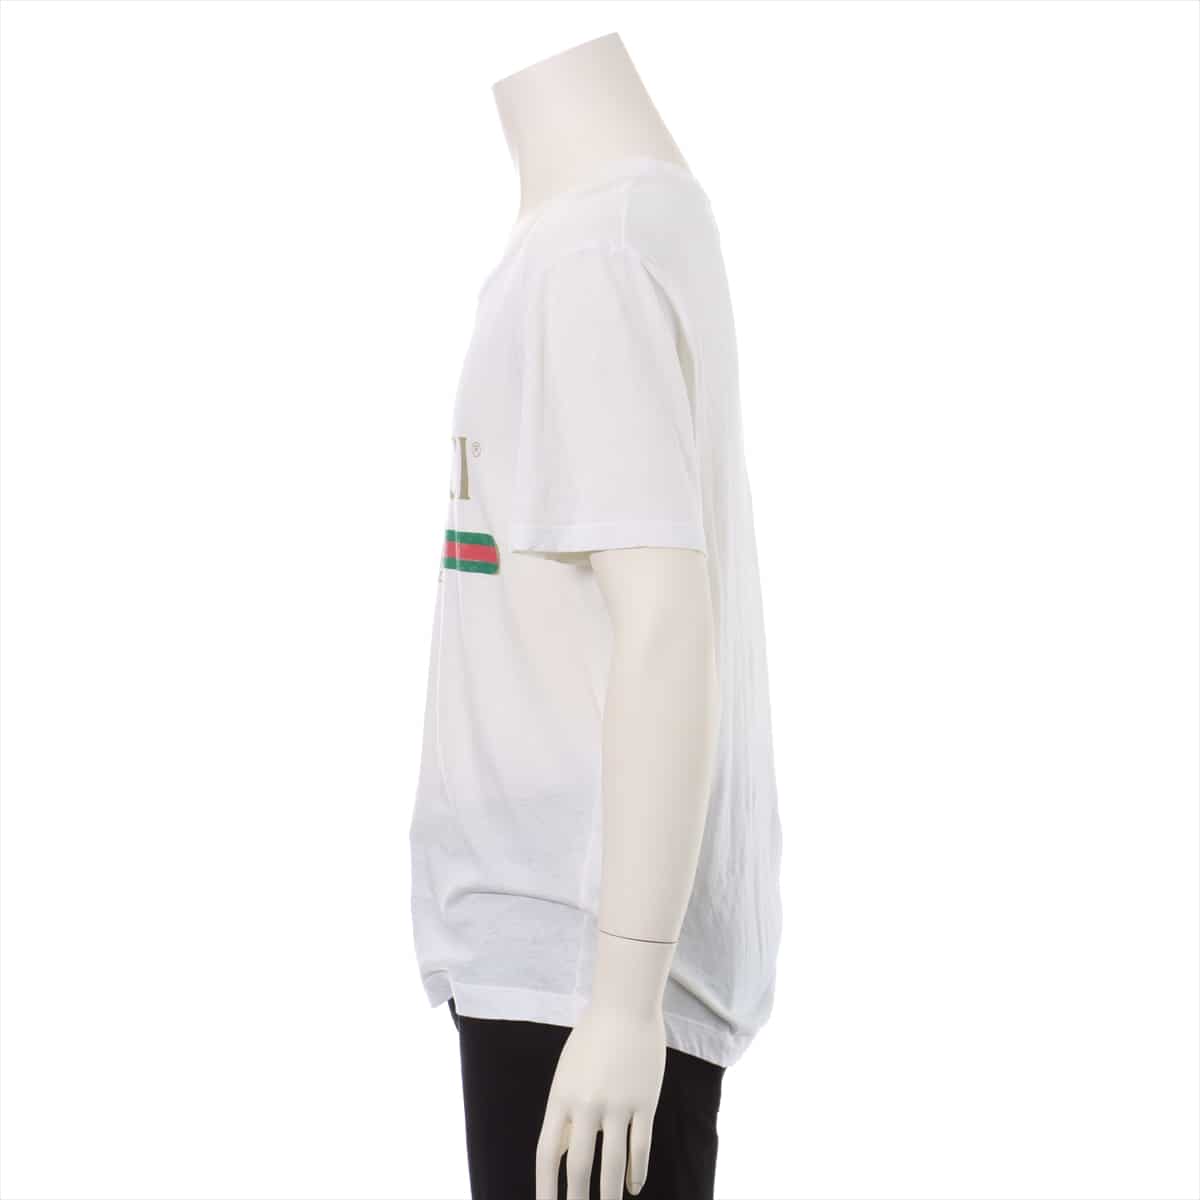 Gucci Vintage logo Cotton T-shirt XS Men's White  Damage processing There are spots on the armpits